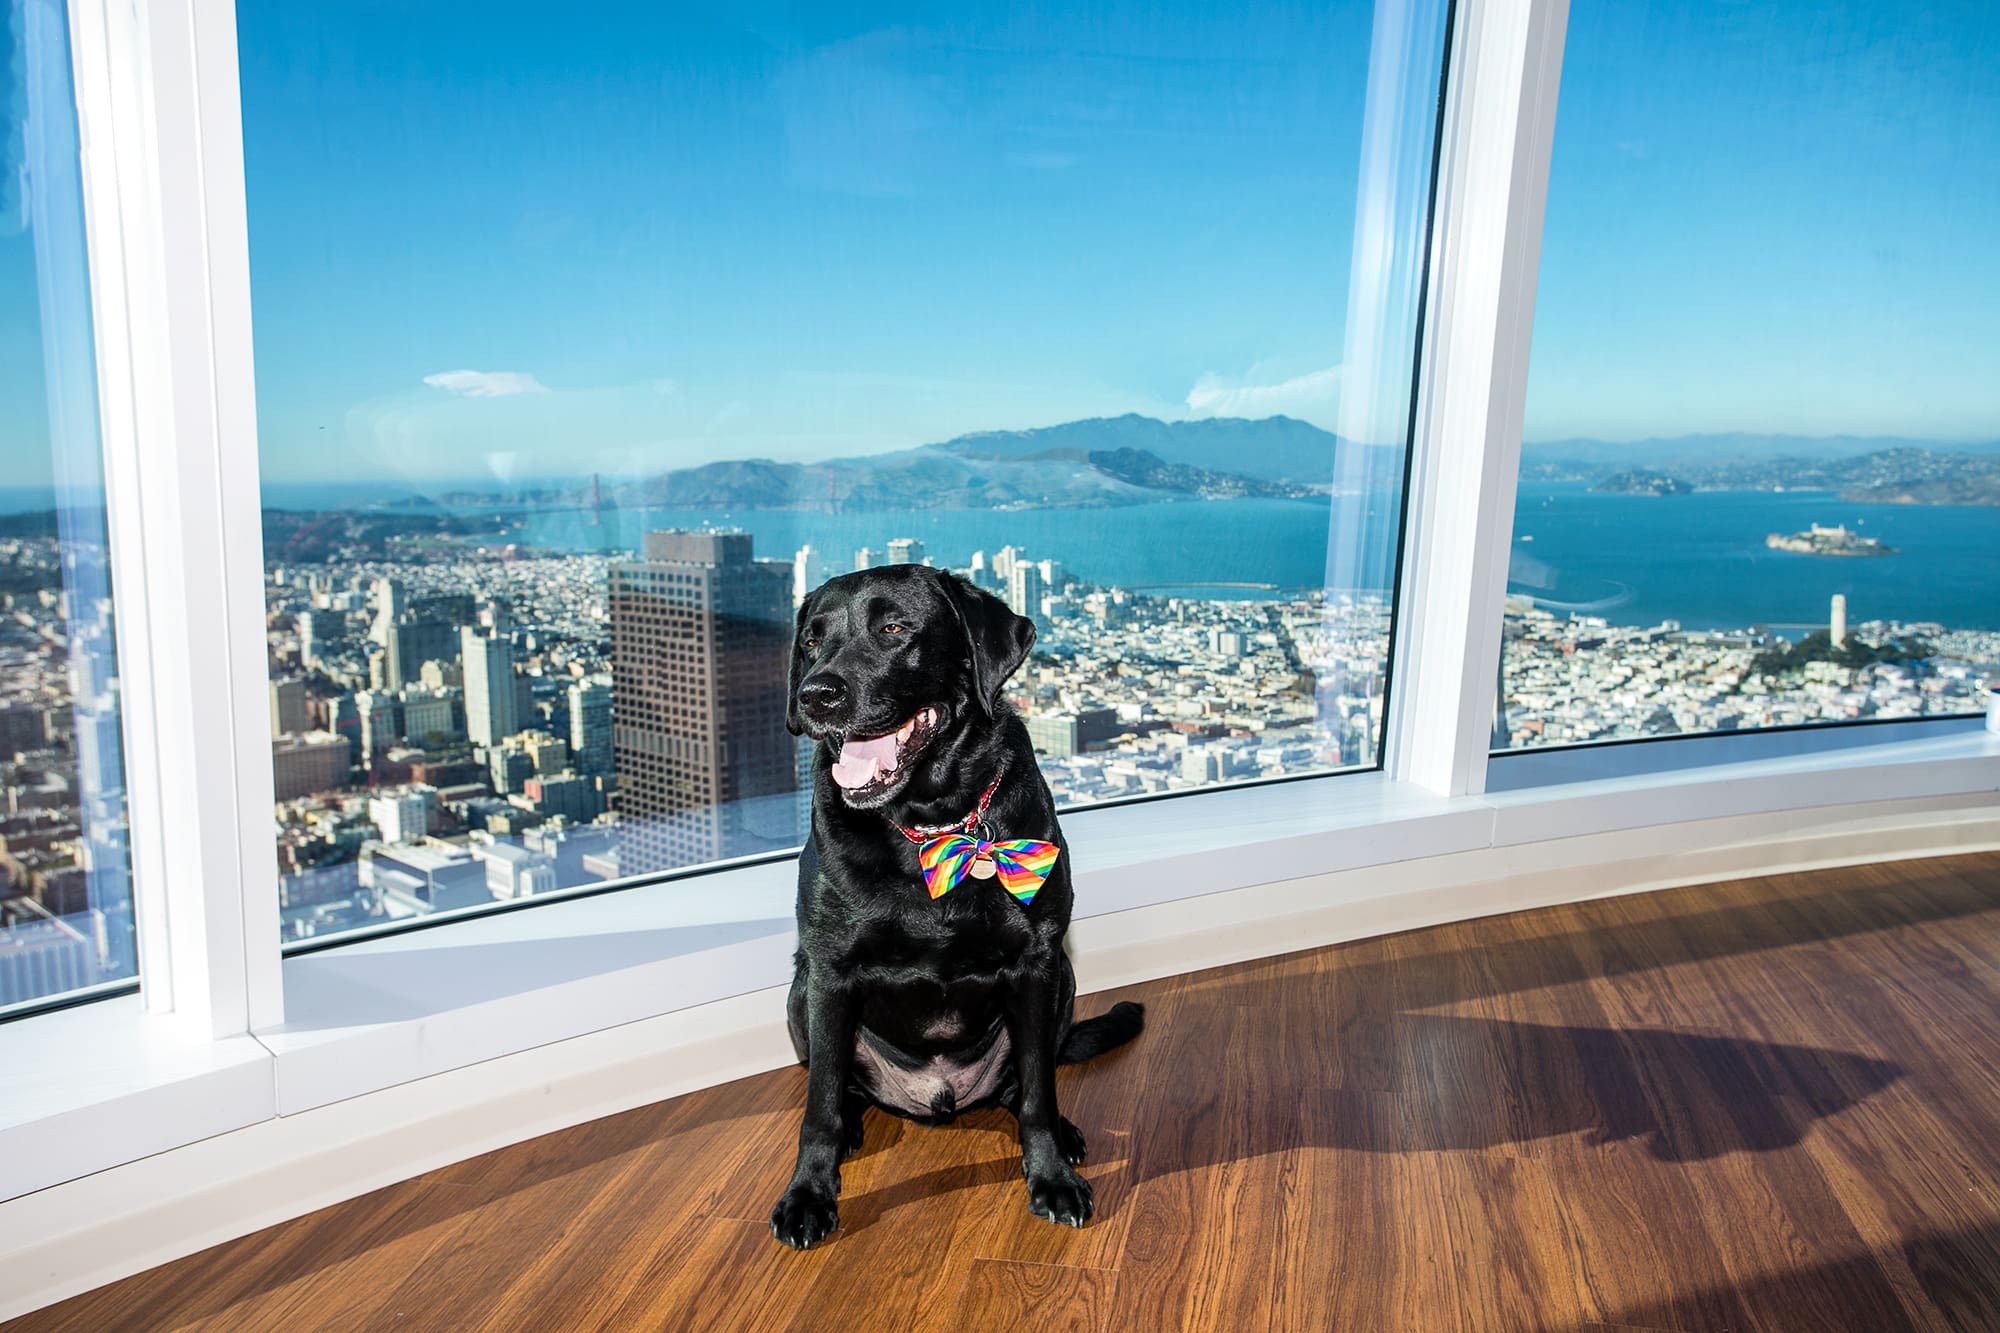 Up on top in the Salesforce tower